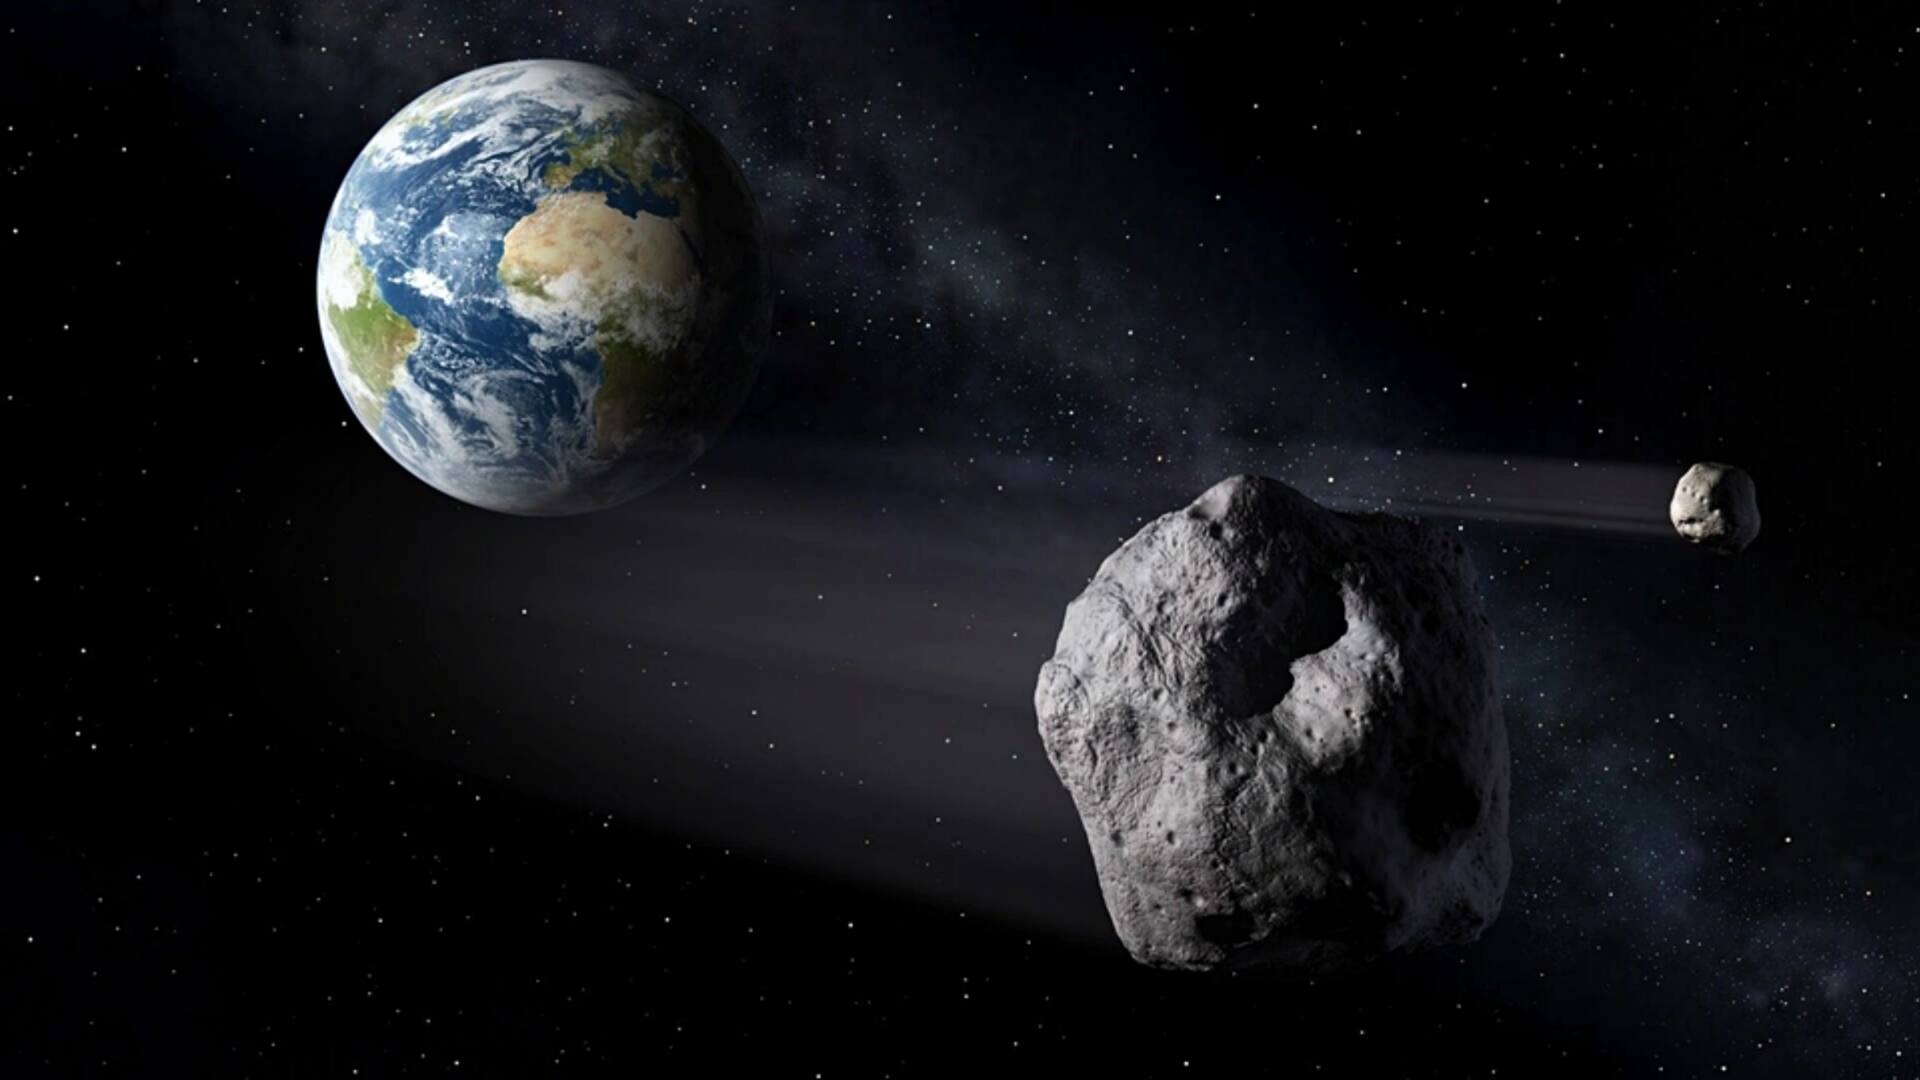 A 65-foot asteroid is approaching Earth today, says NASA